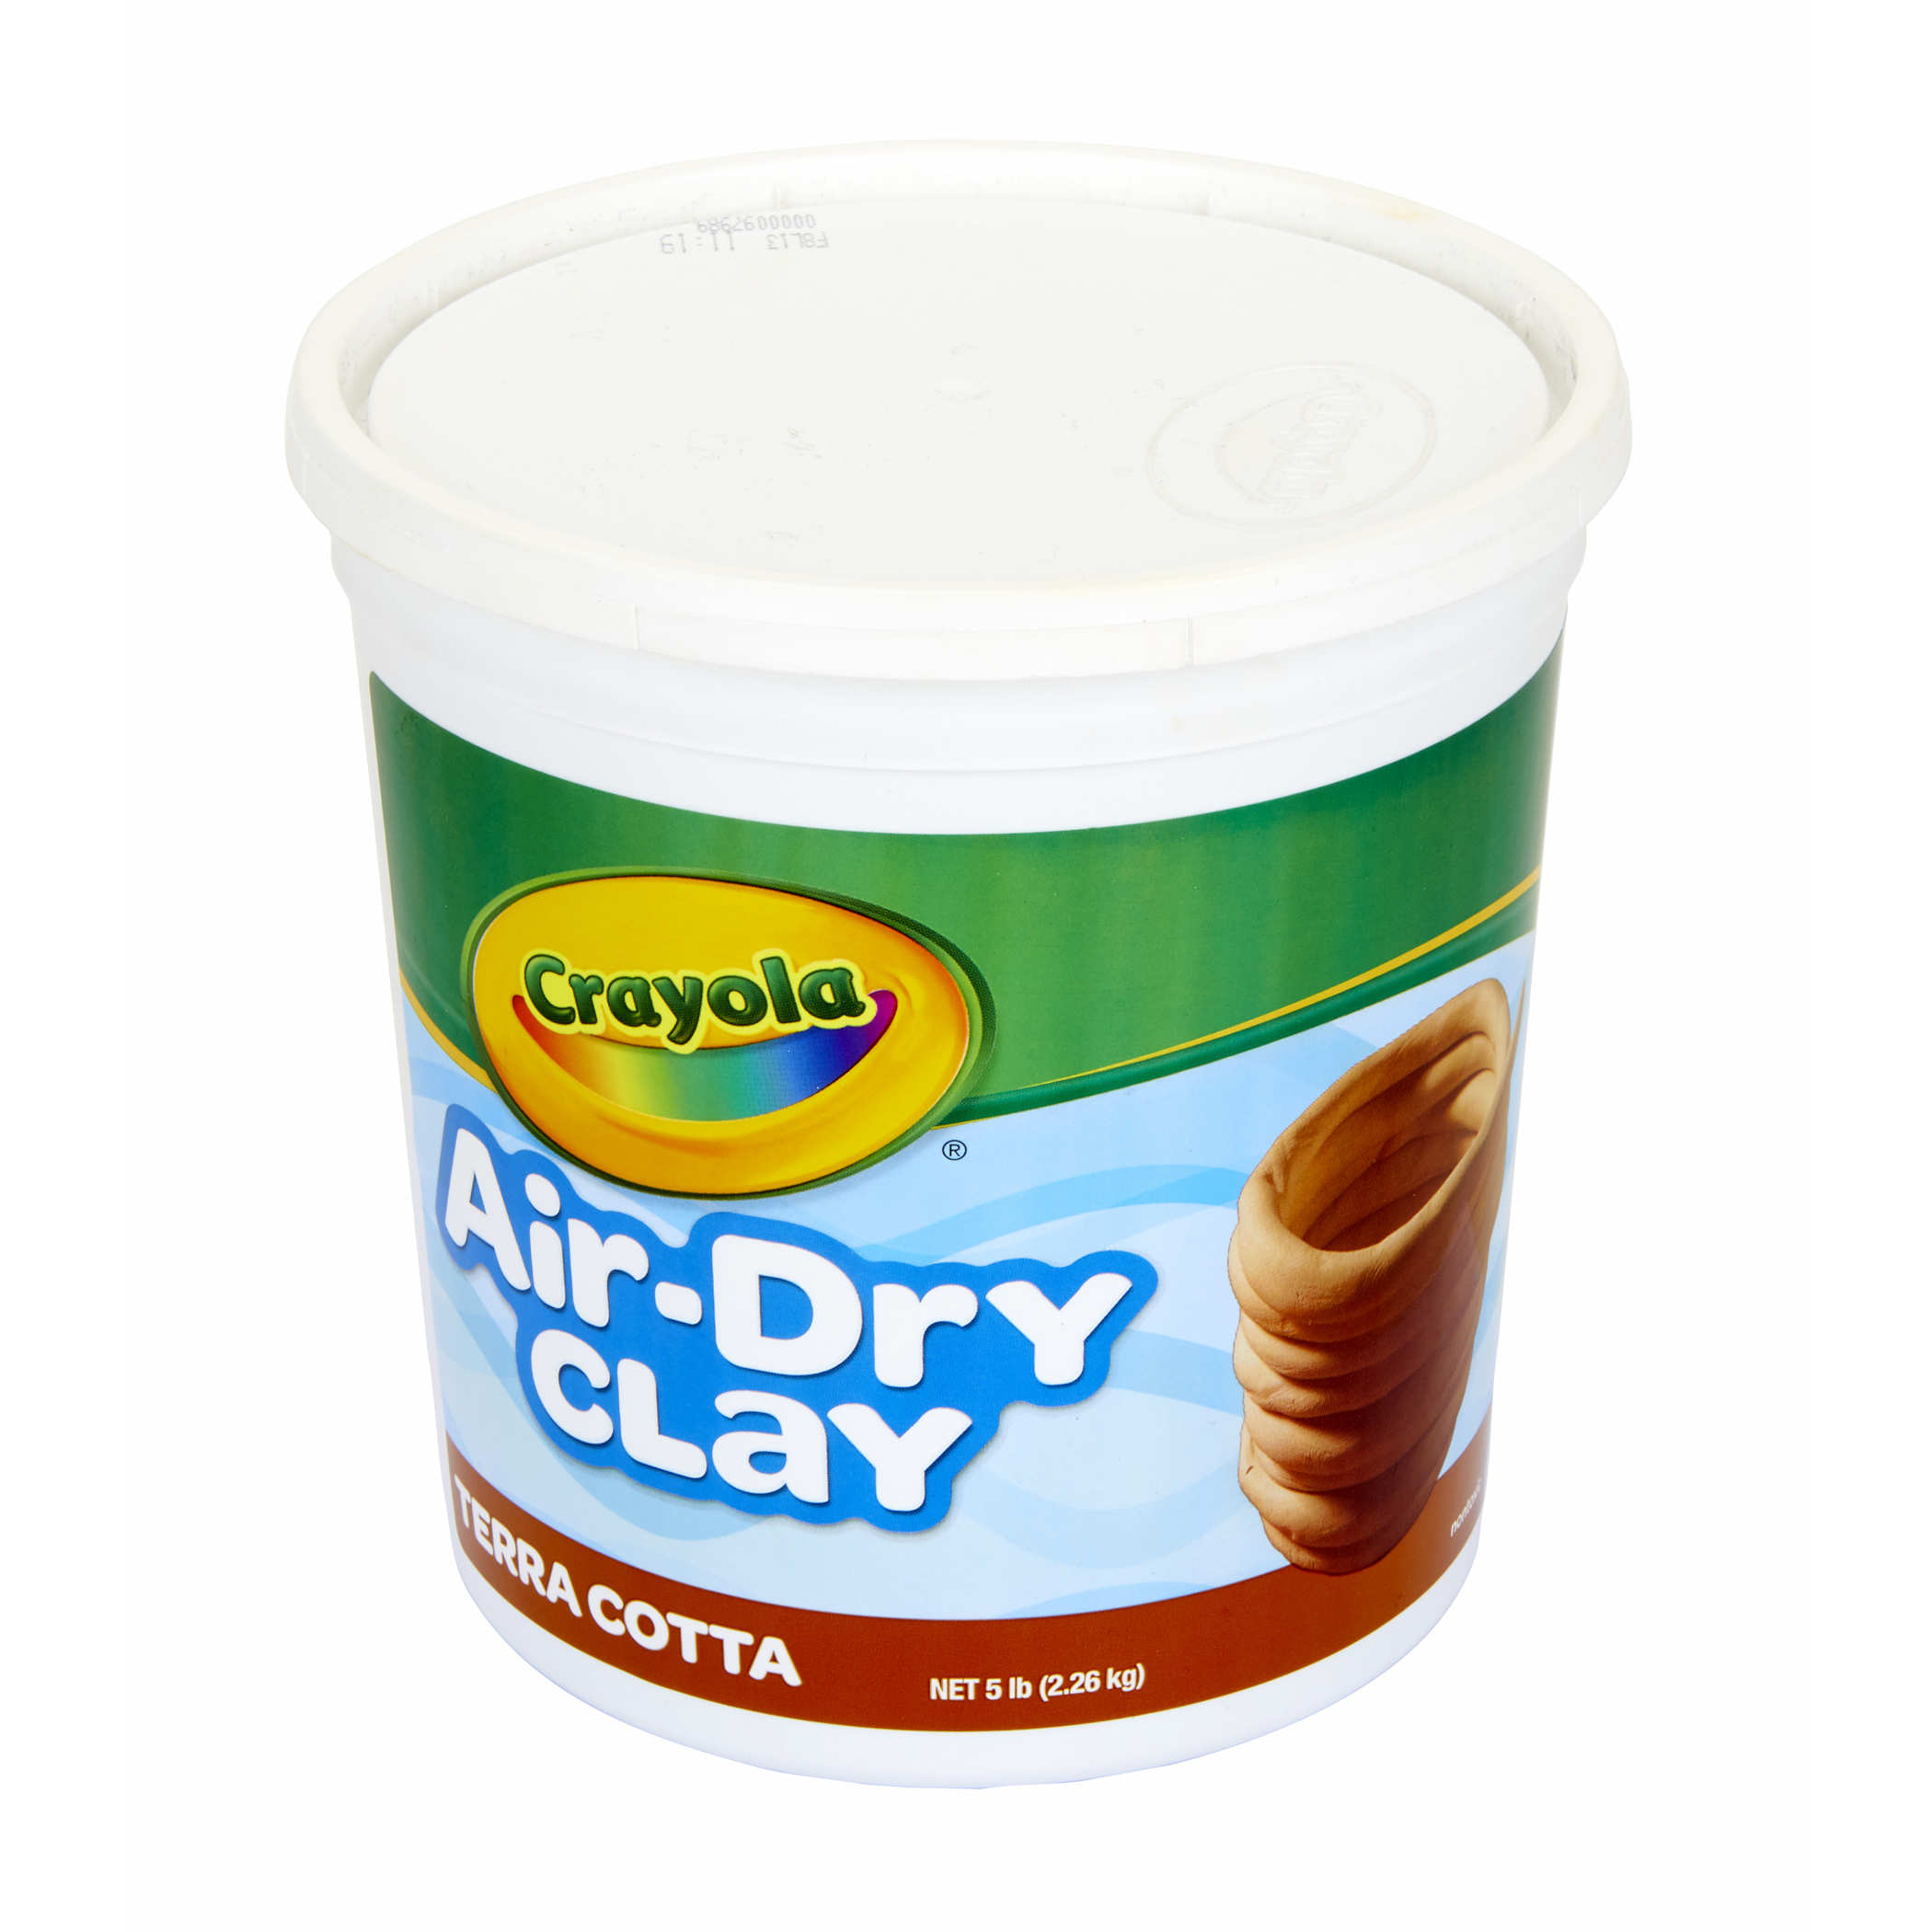 Crayola Air-Dry Clay, White, 5 lb Tub, Pack of 2